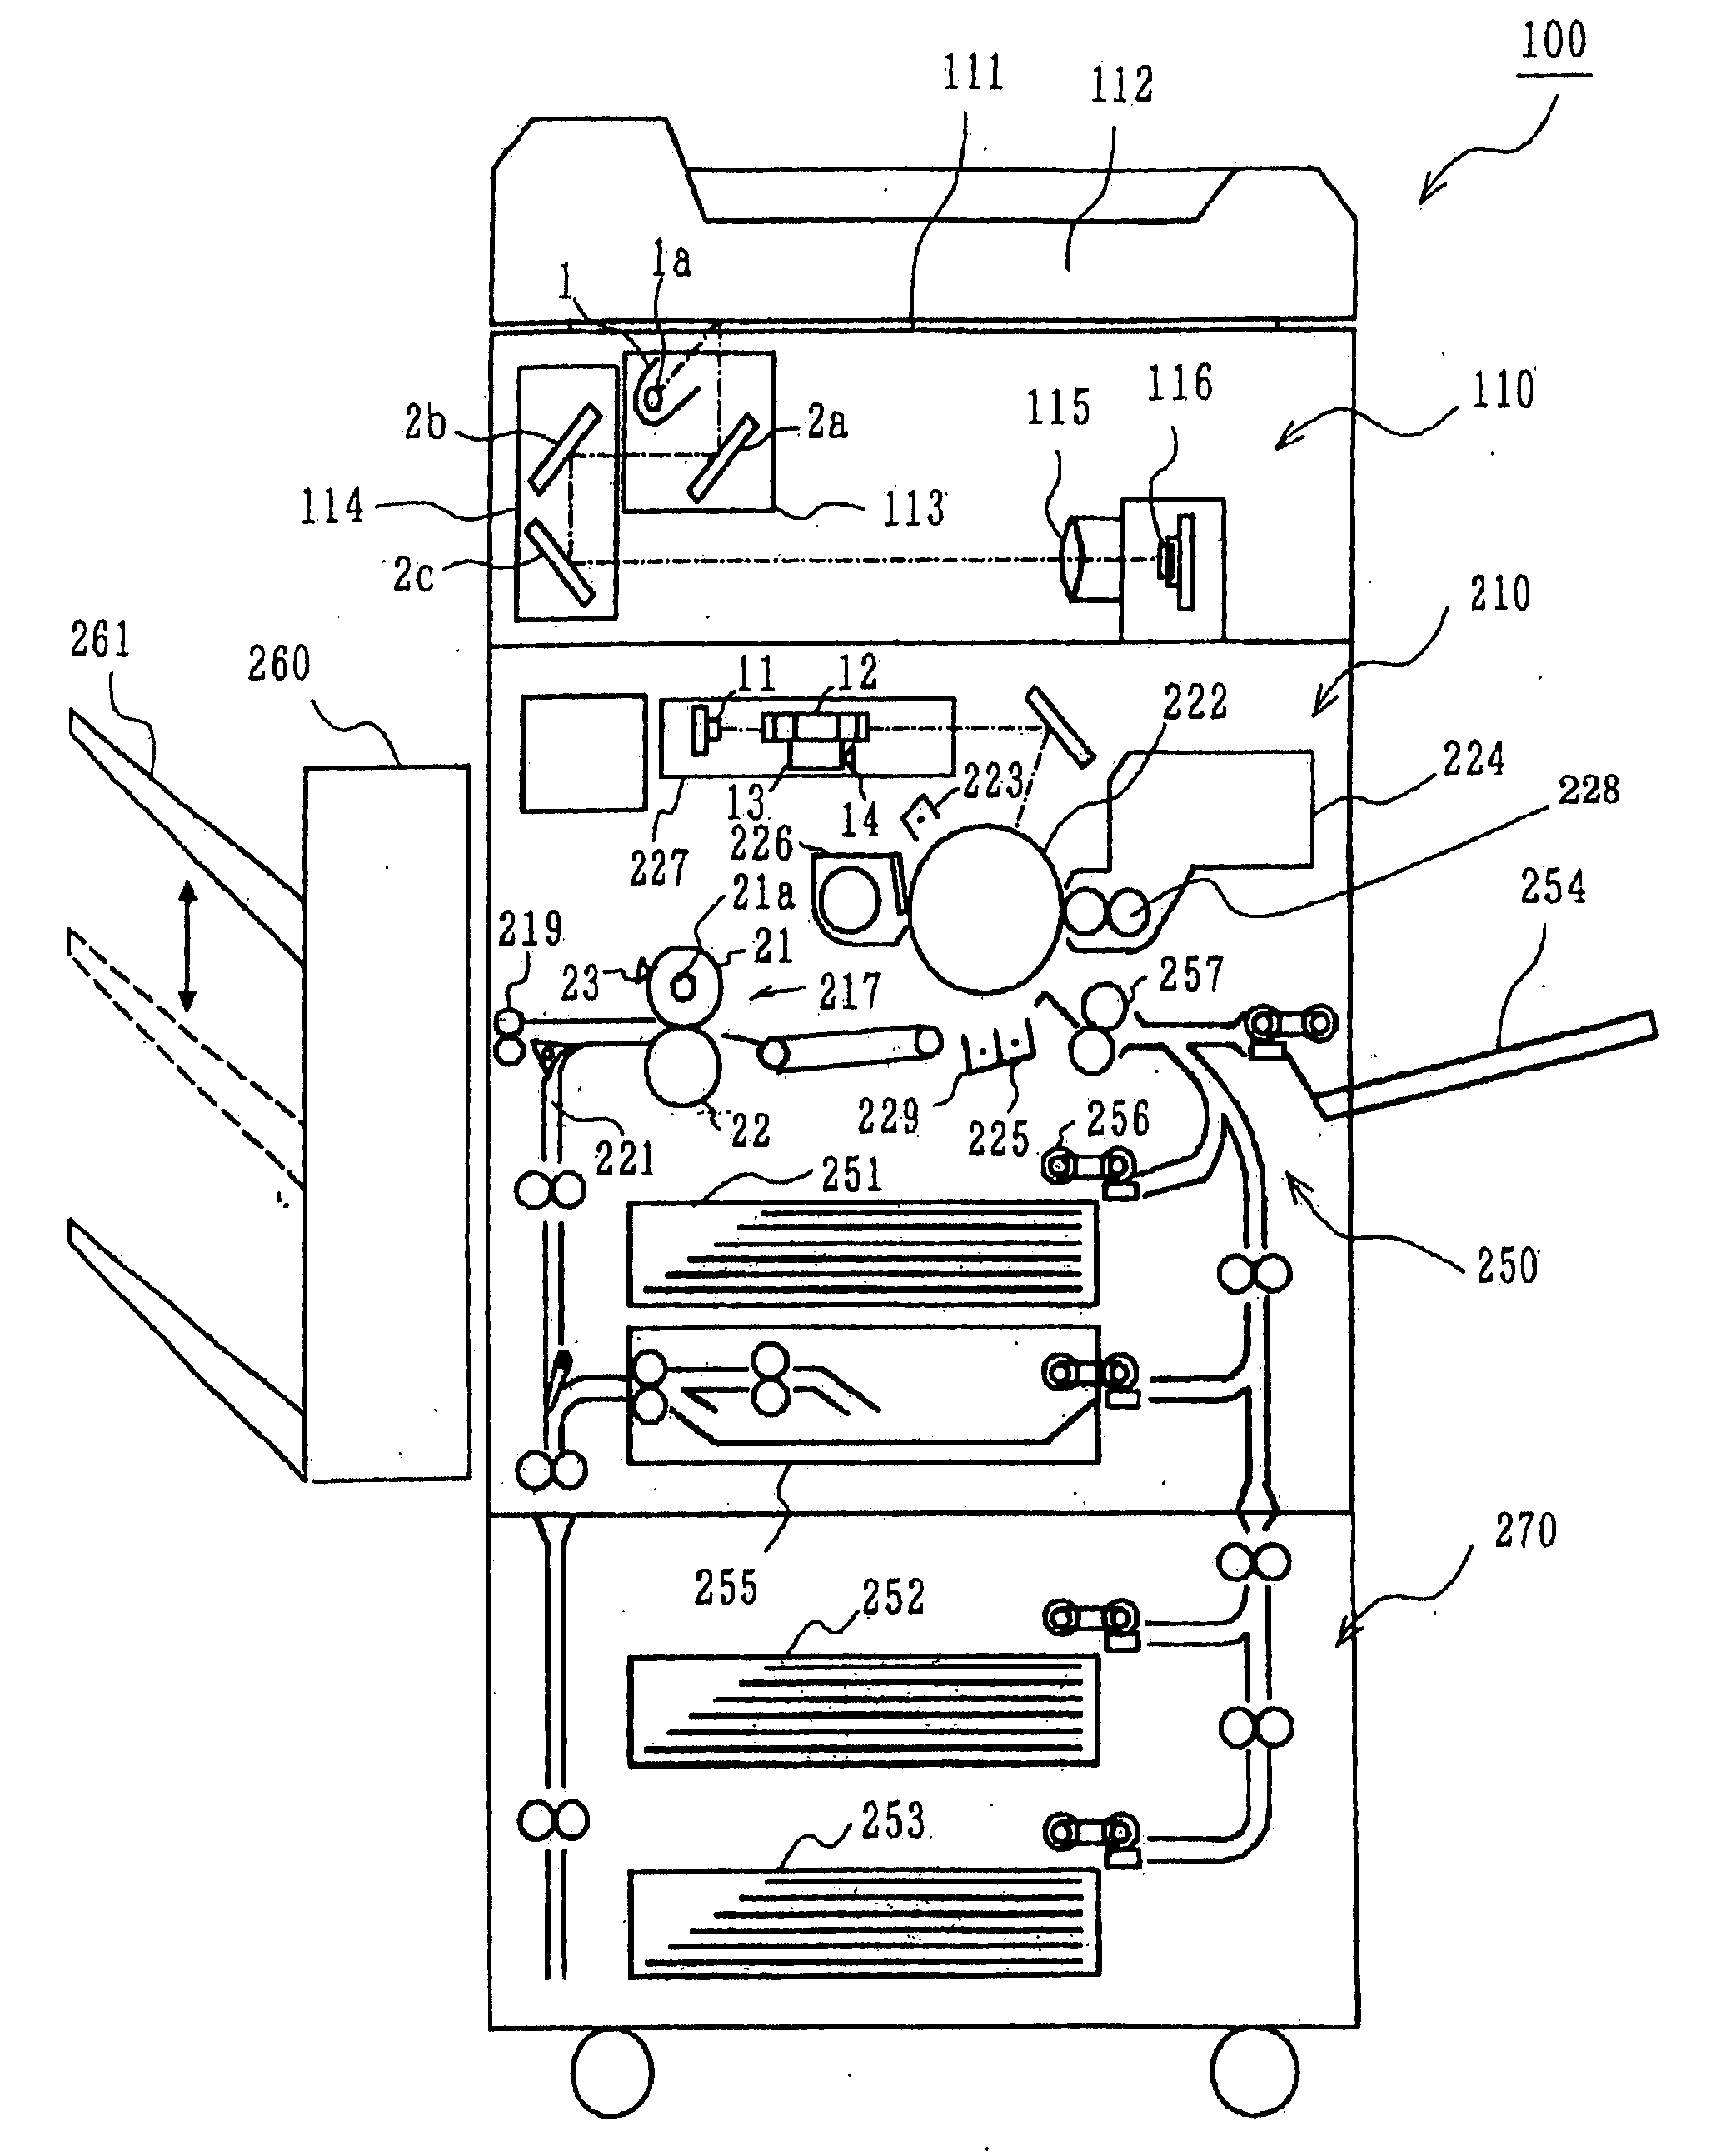 Image processing apparatus, image forming apparatus and document reading apparatus